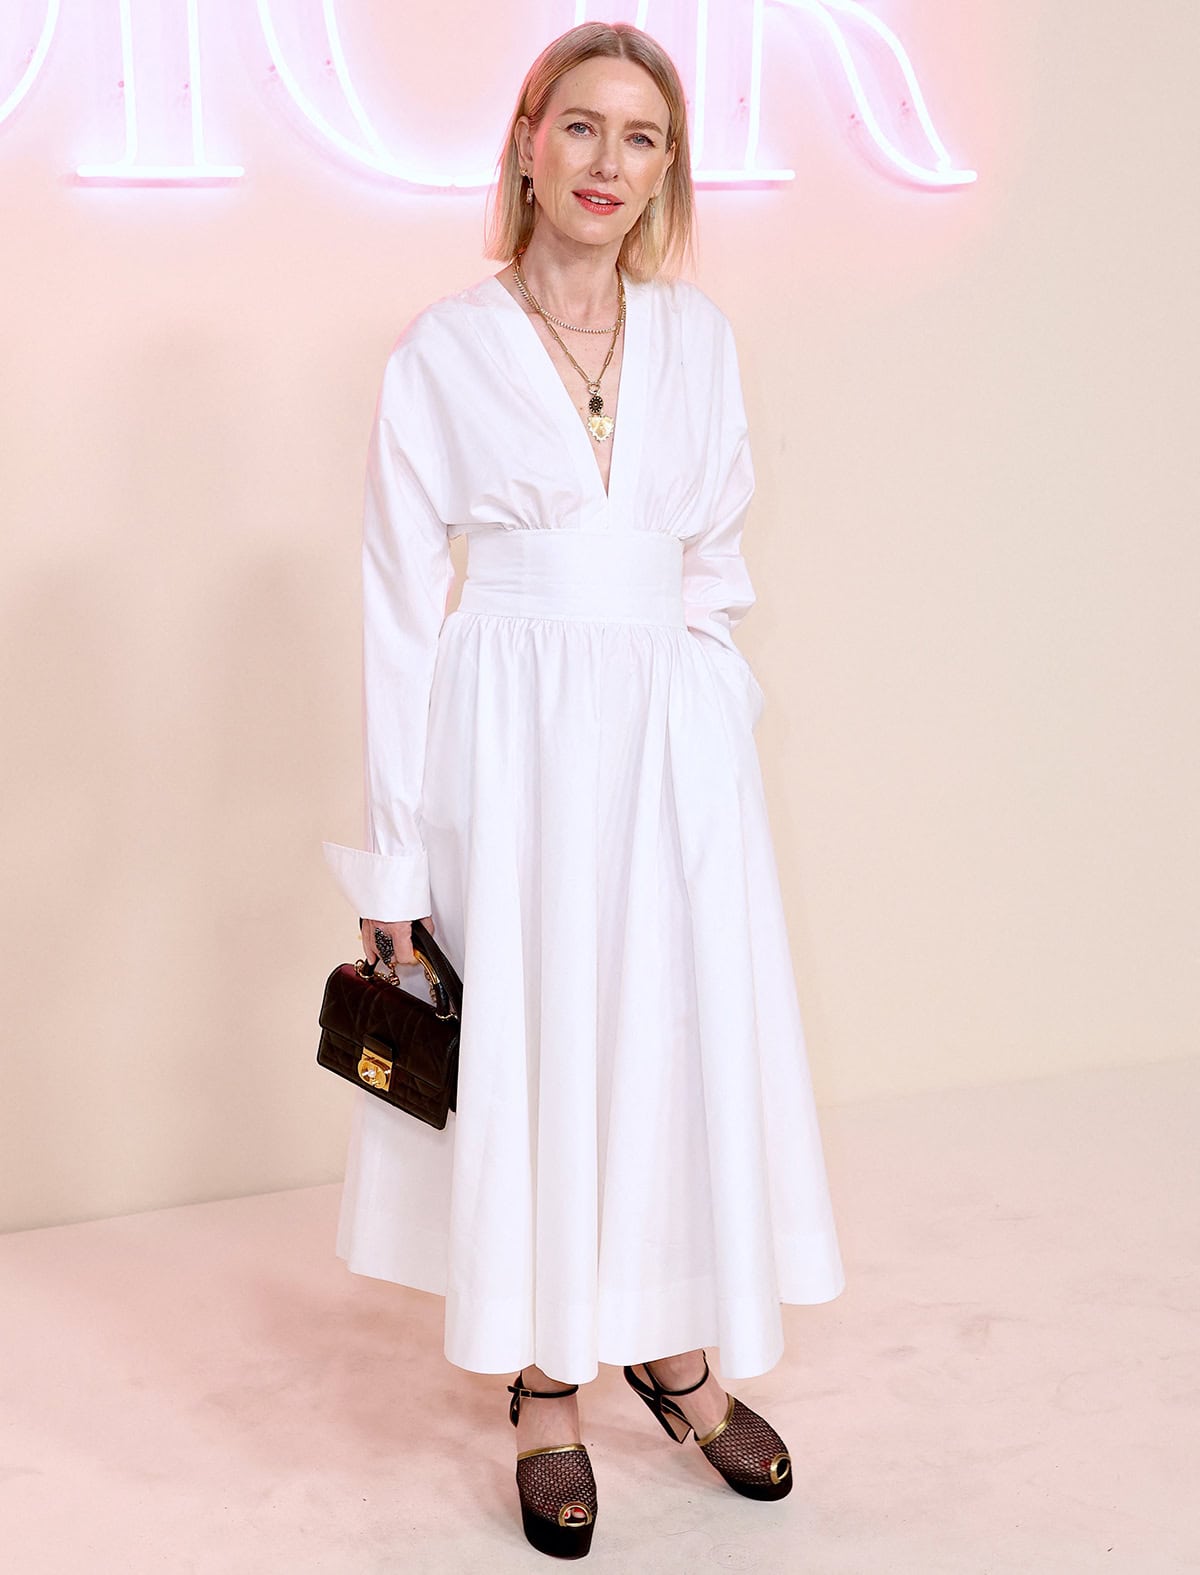 Naomi Watts is radiant in an elegant white Dior midi dress featuring a plunging neckline, a waistband, and long sleeves